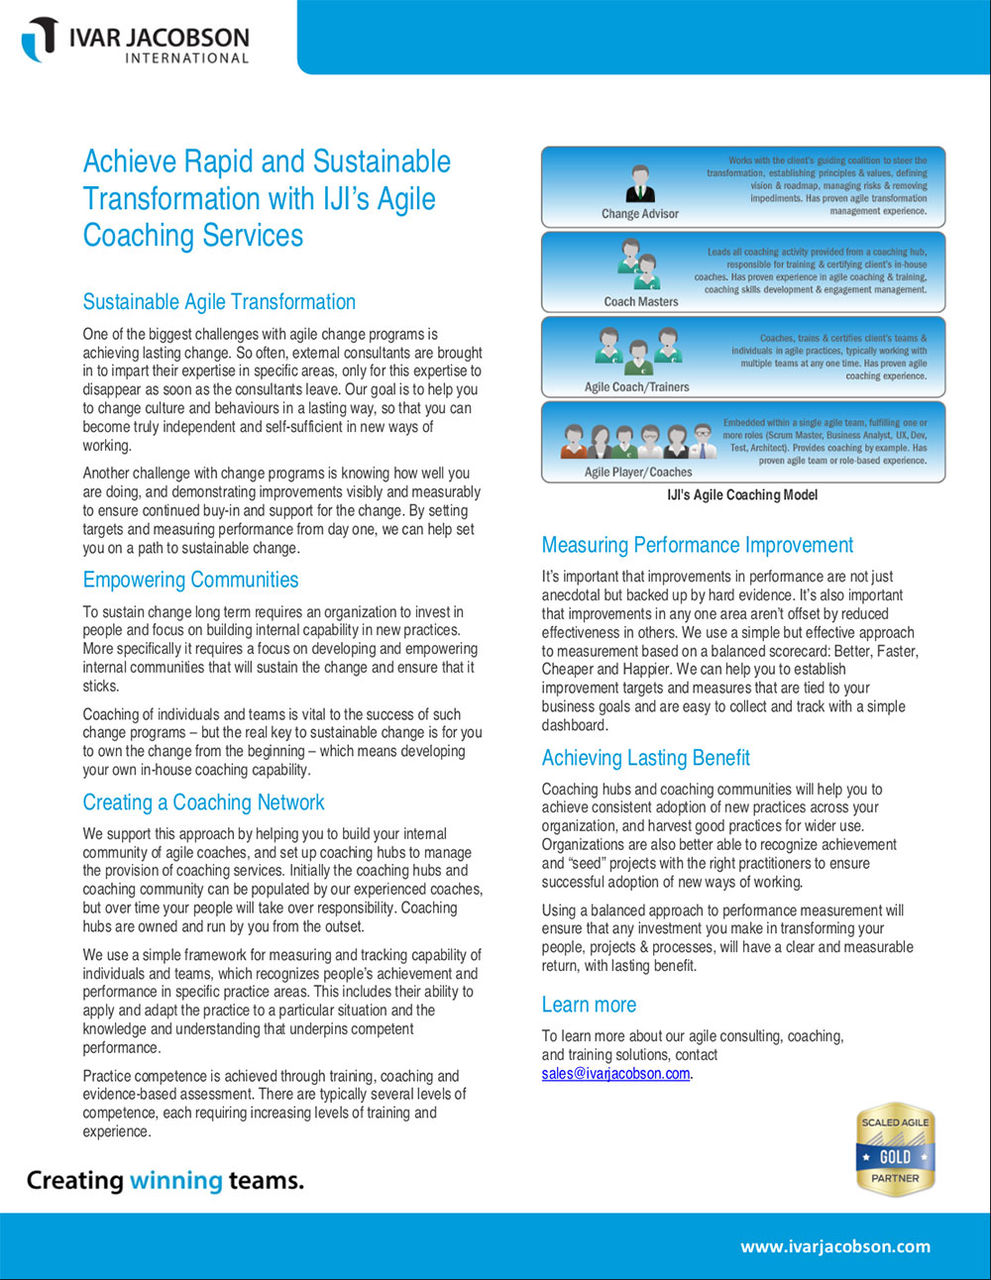 Achieve Rapid and Sustainable Agile Transformation